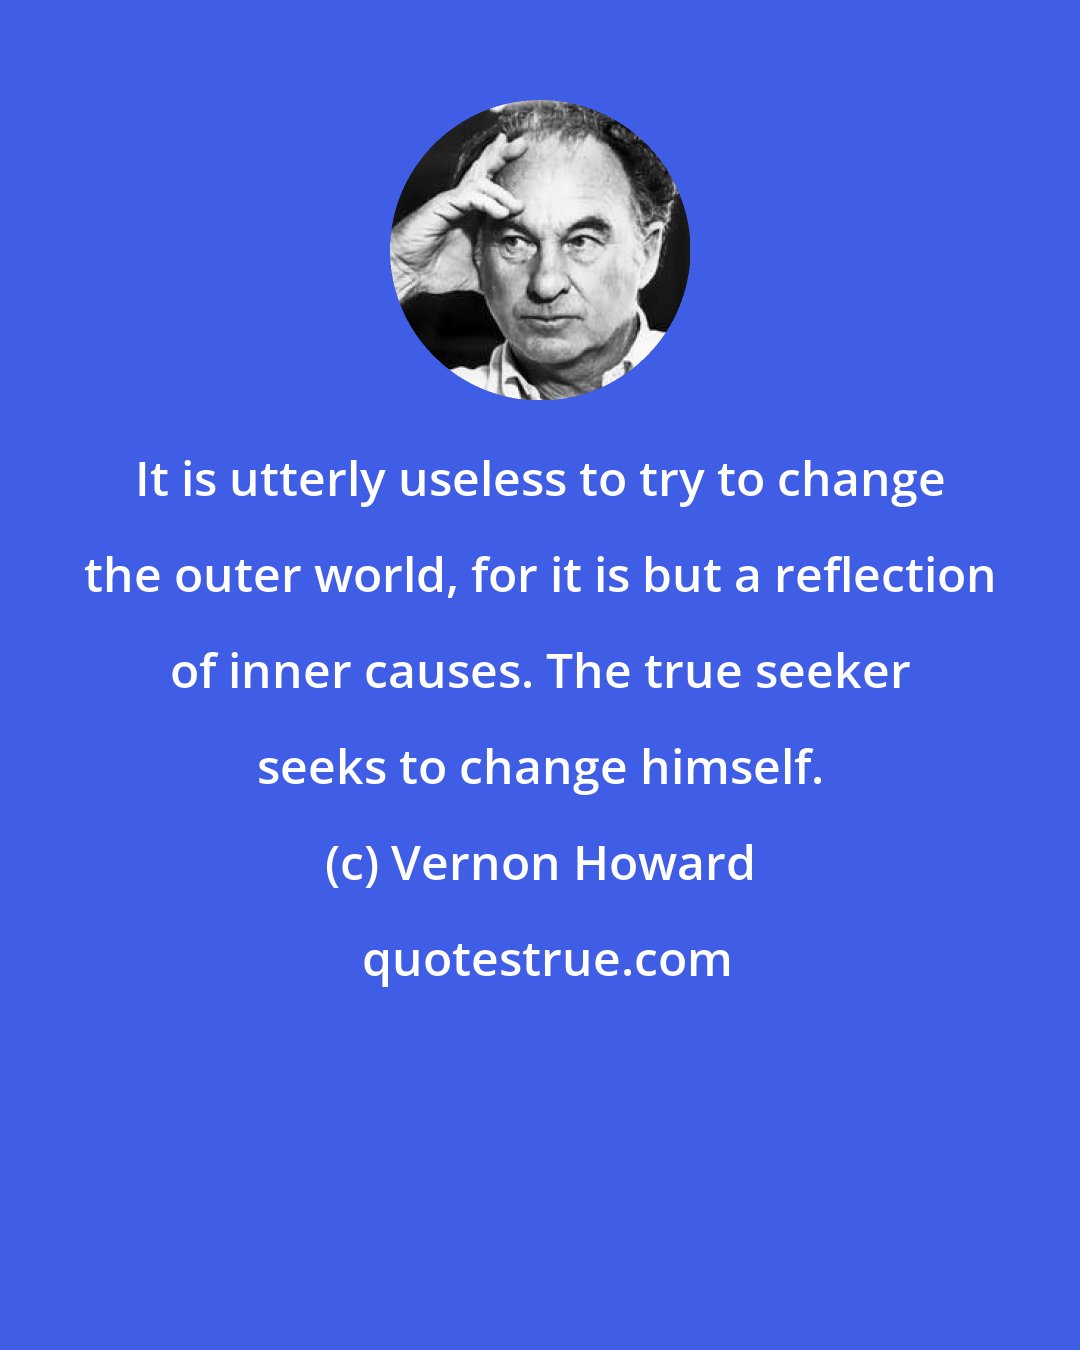 Vernon Howard: It is utterly useless to try to change the outer world, for it is but a reflection of inner causes. The true seeker seeks to change himself.